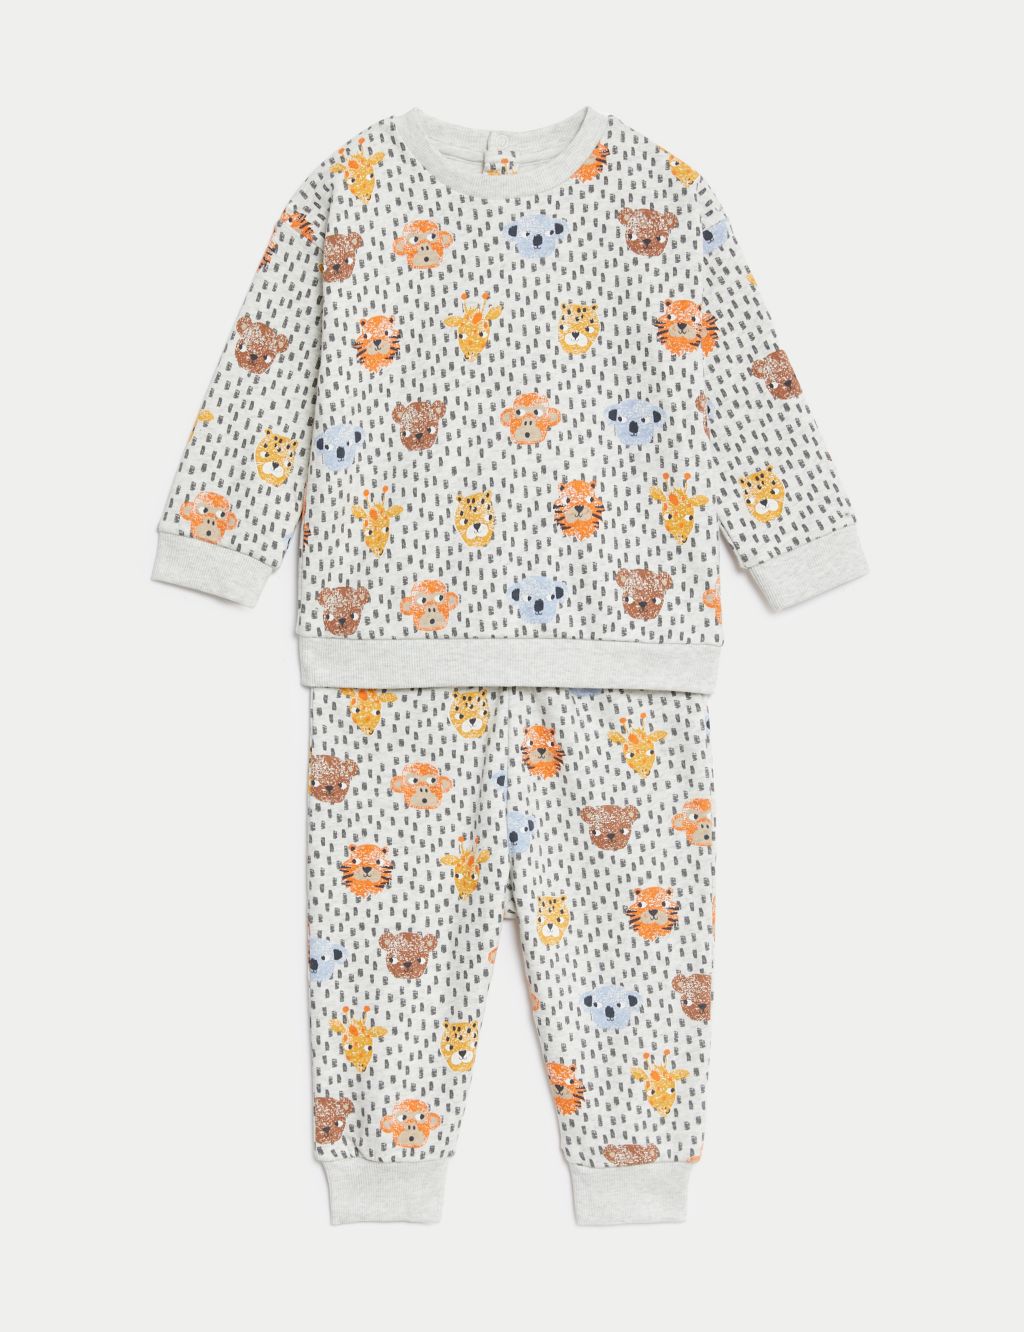 Cotton Rich Animal Outfit (0-3 Yrs) image 1